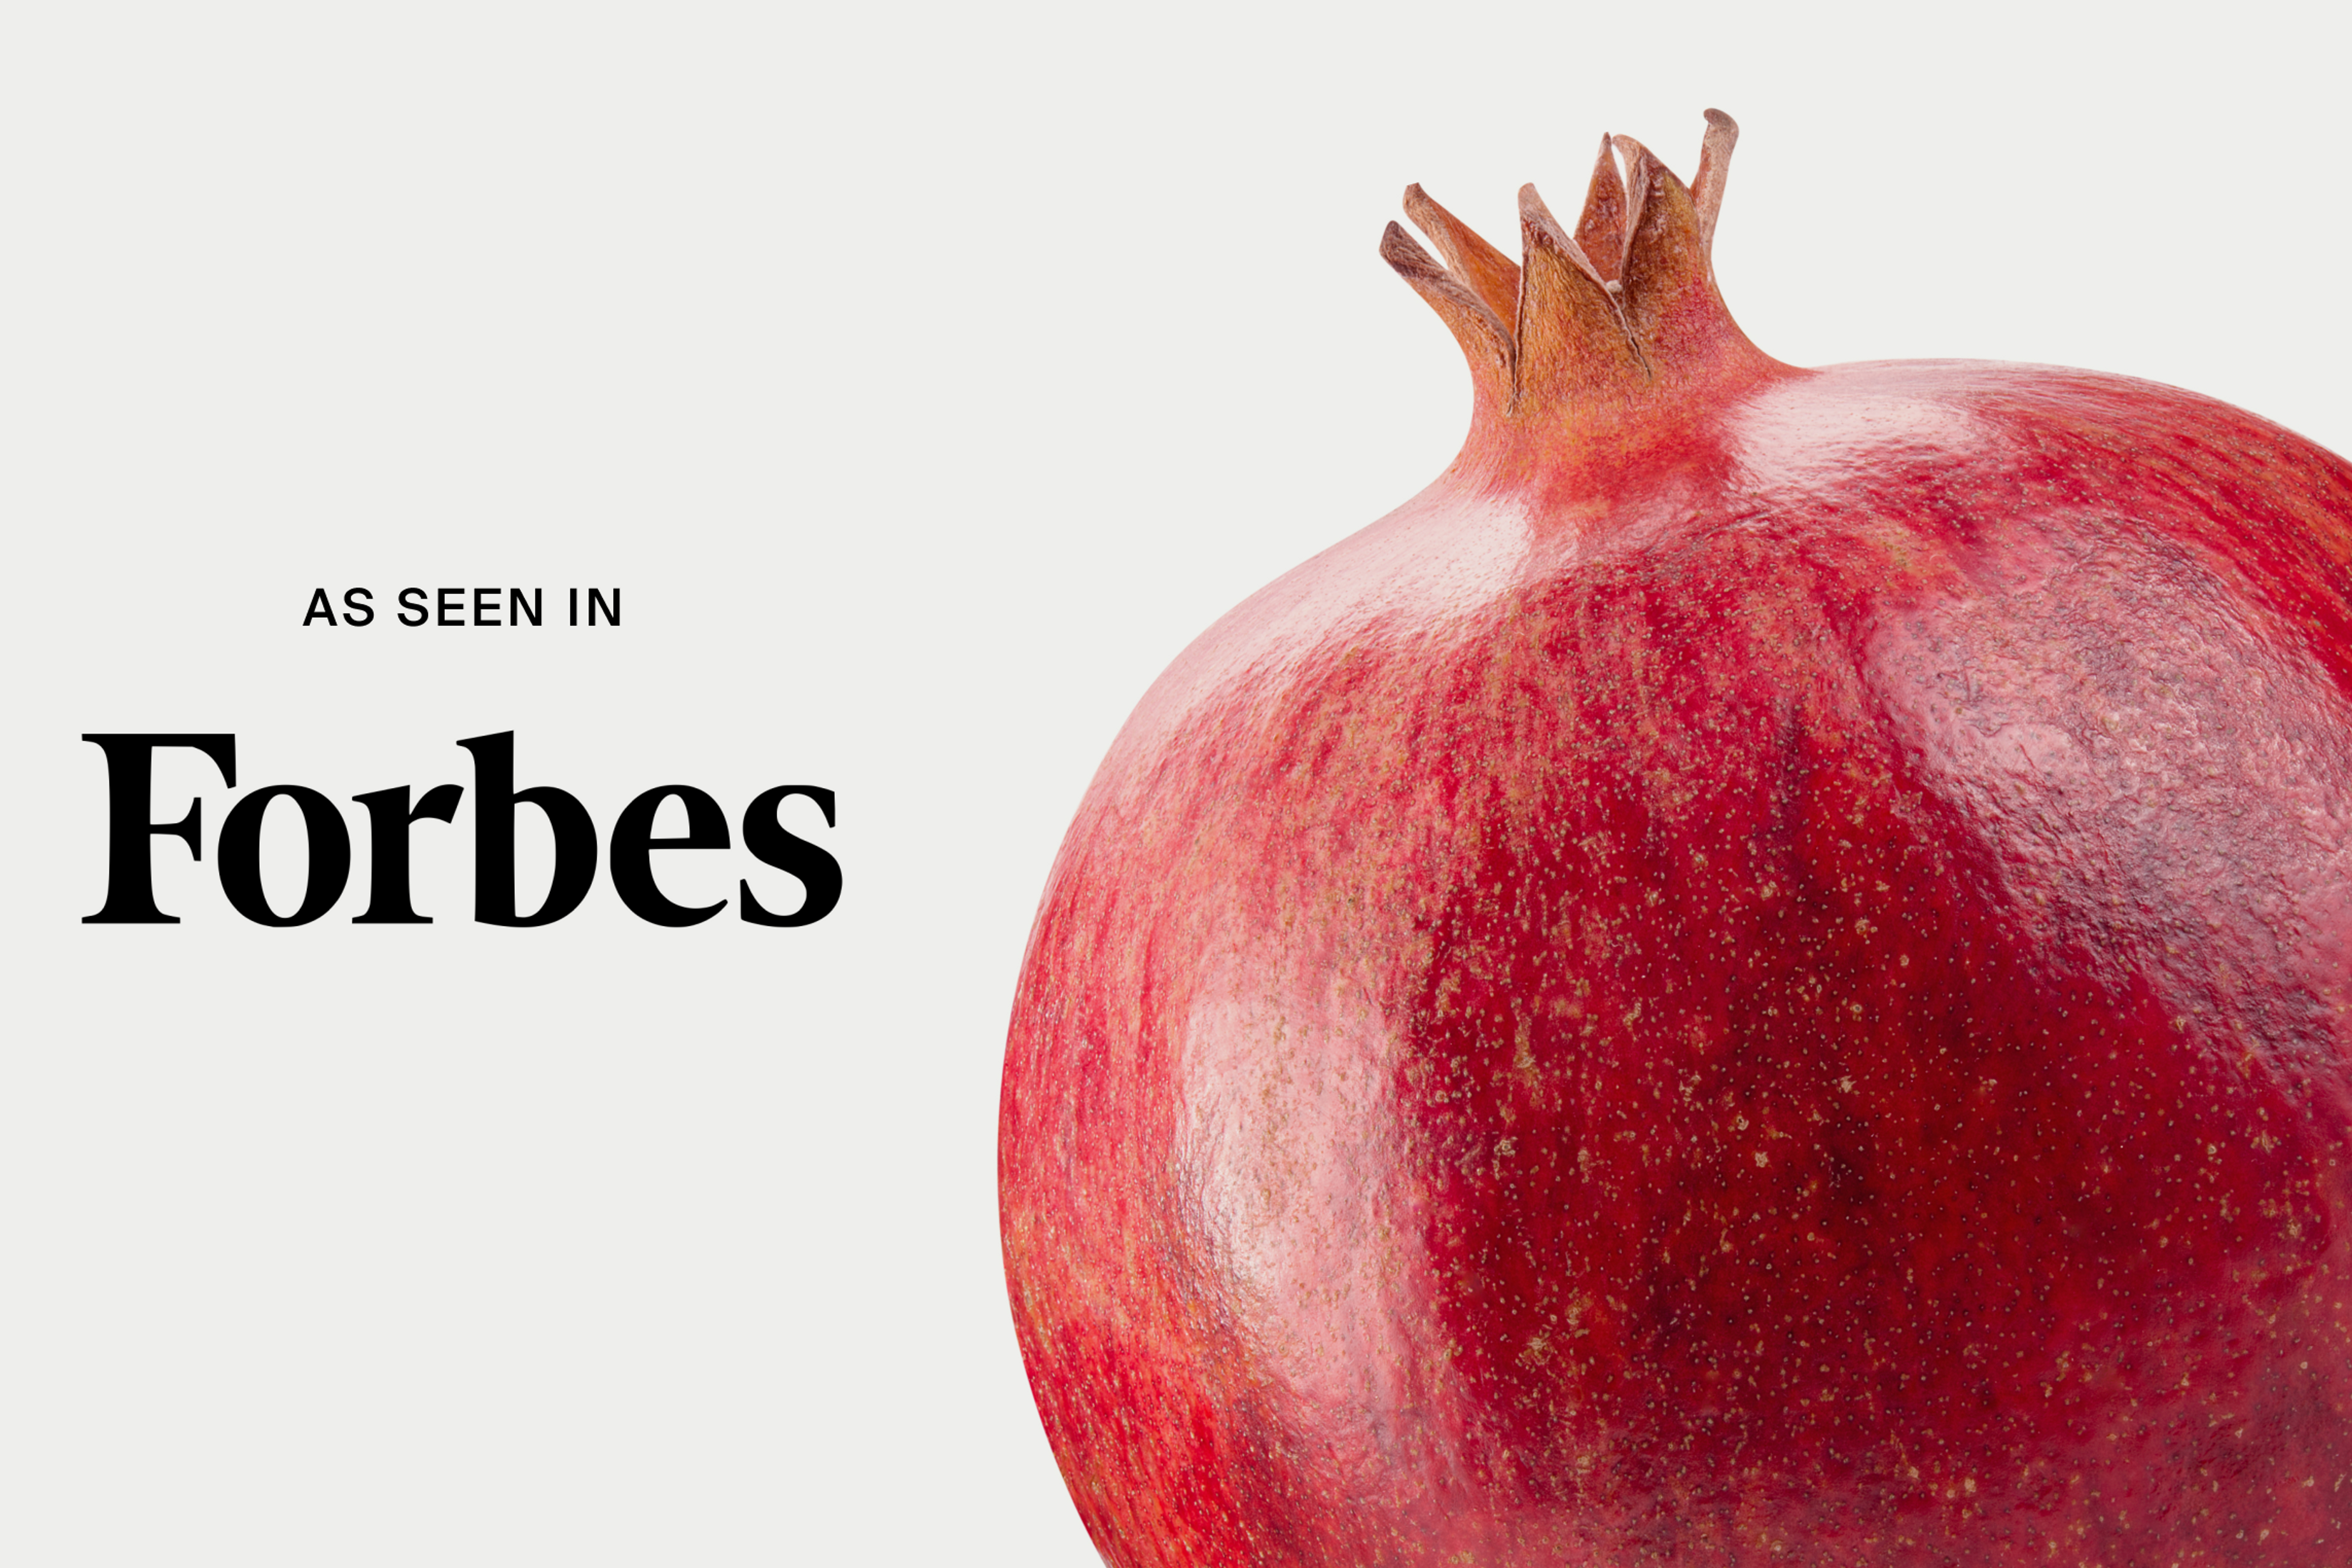 Pomegranate unlocks rejuvenation for aging immune systems, as seen in Forbes.